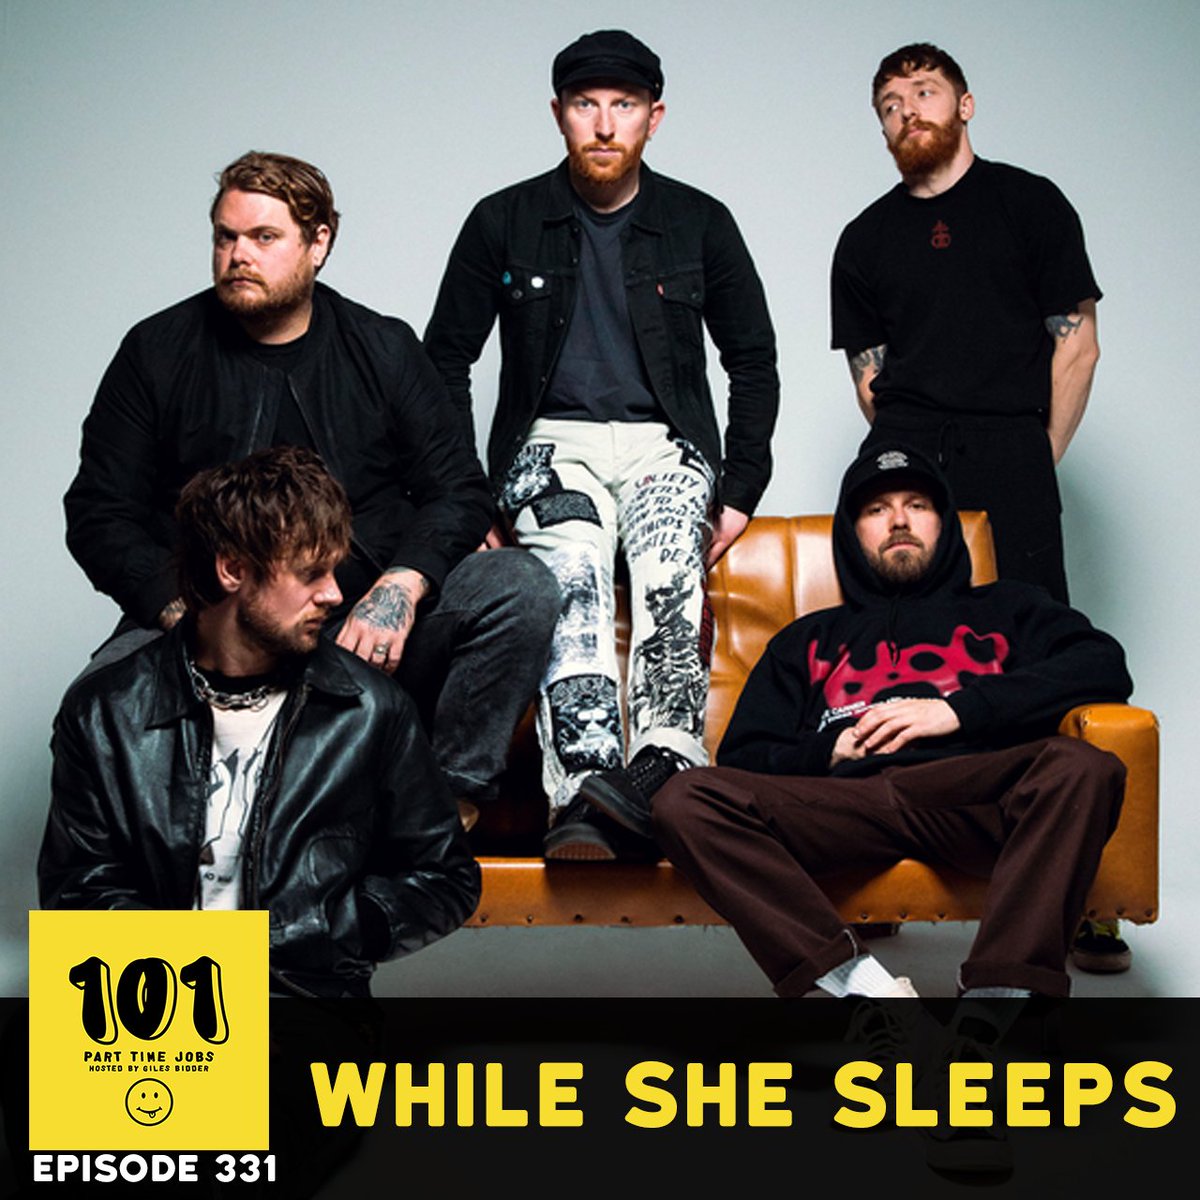 Before they release their sixth album SELF HELL, listen to Lawrence, Mat and Sean from @whileshesleeps about being the gnarliest DIY metal band. Listen to the full episode at linktr.ee/101parttimejobs